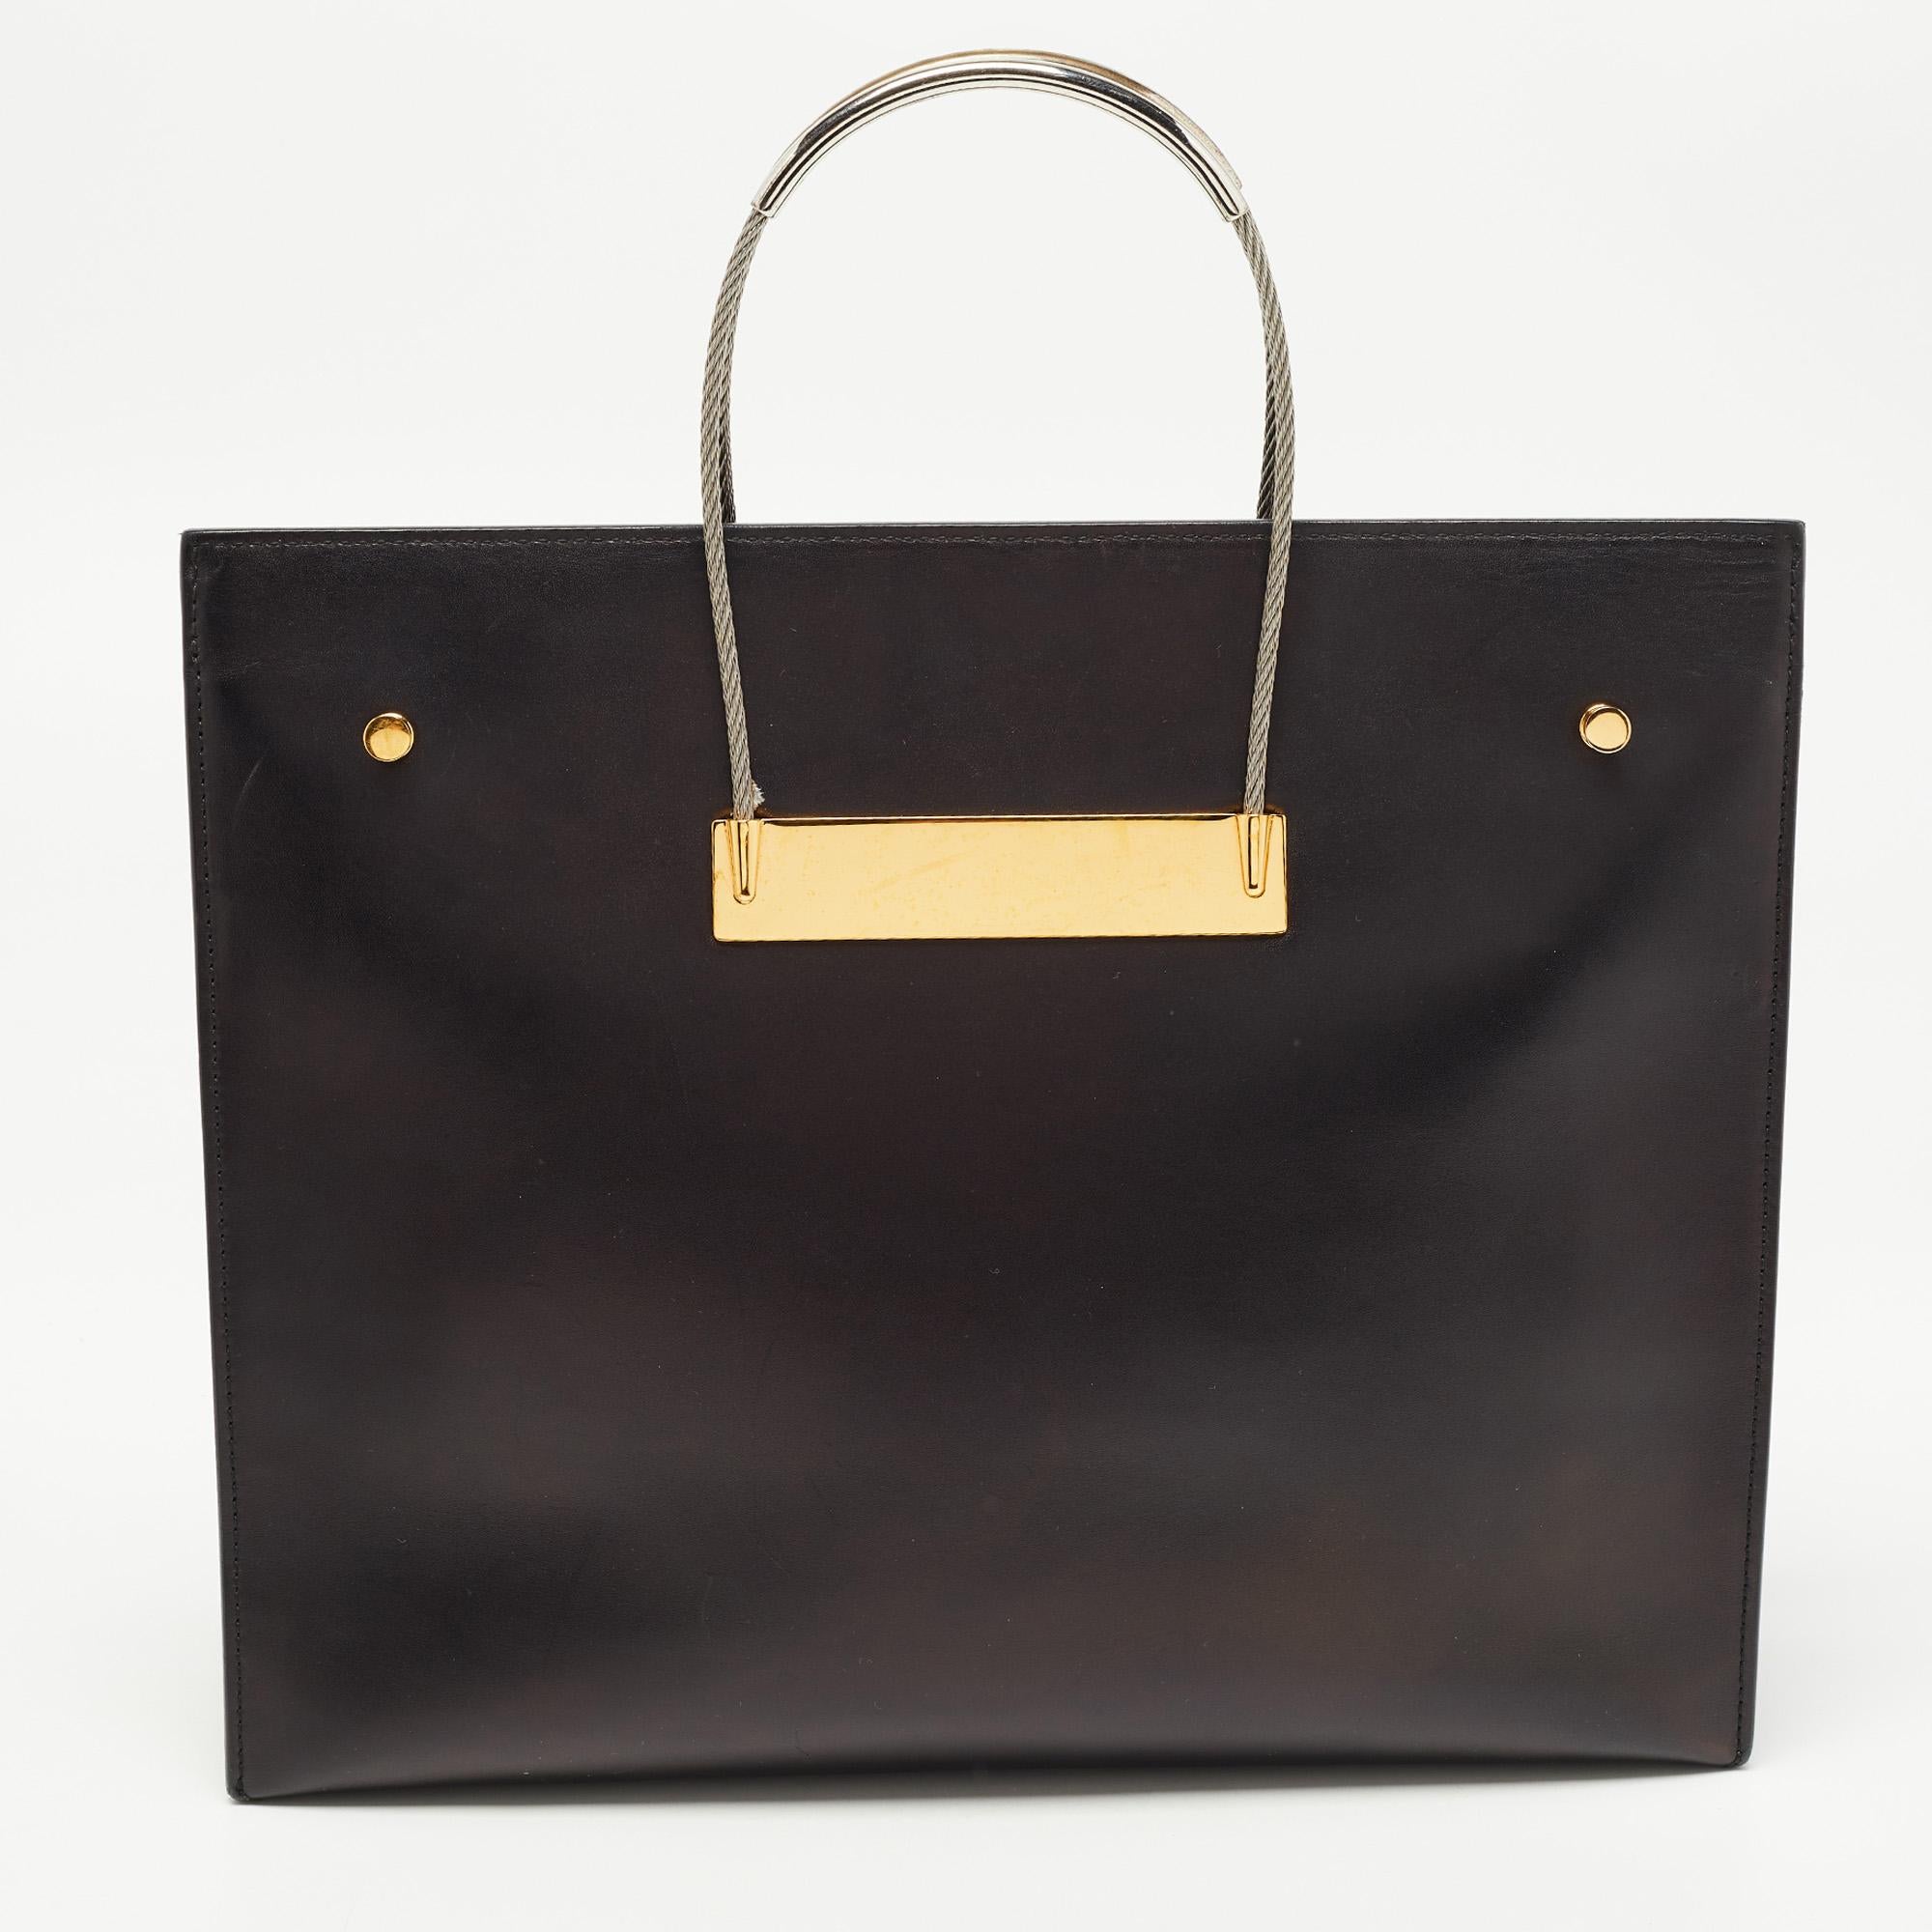 This shopper tote from the luxury fashion label, Balenciaga, is handy and the structure of the creation gives it a stylish edge. It is made of leather and designed with a front brand plaque and an ideally spacious interior. It is equipped with atop